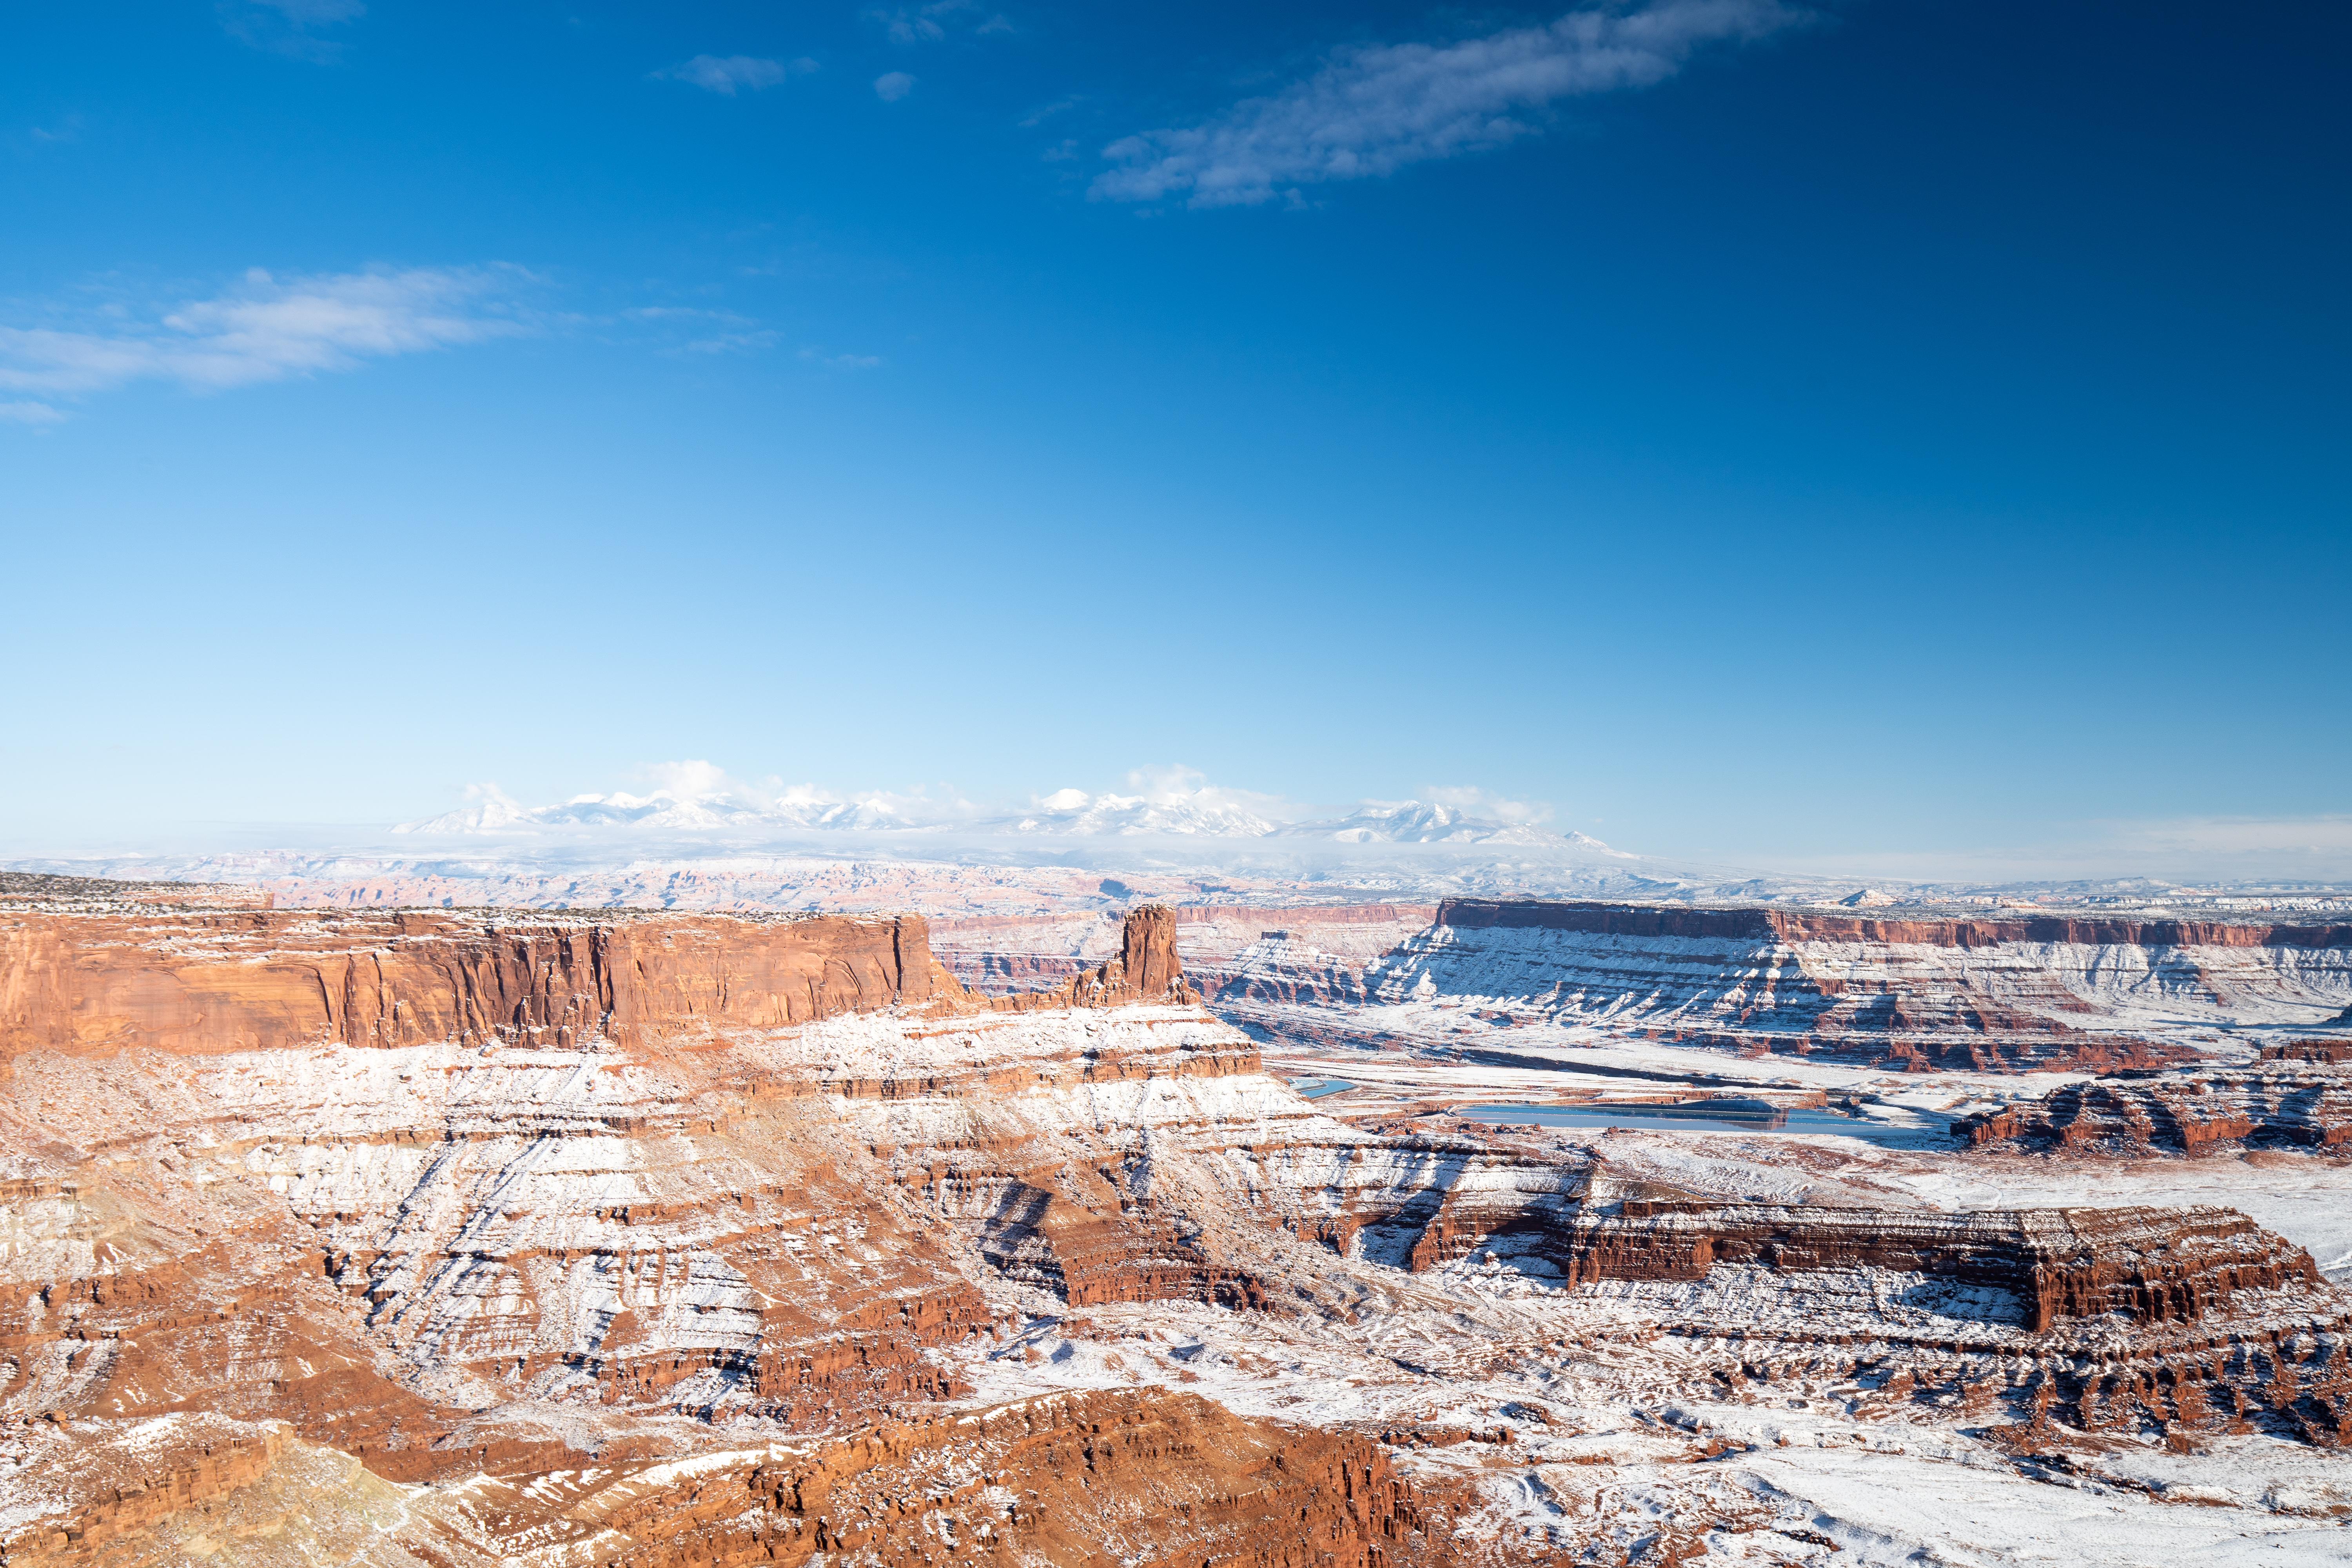 Snow Covered Canyons Near Moab Ut With La Sal Mountains In The